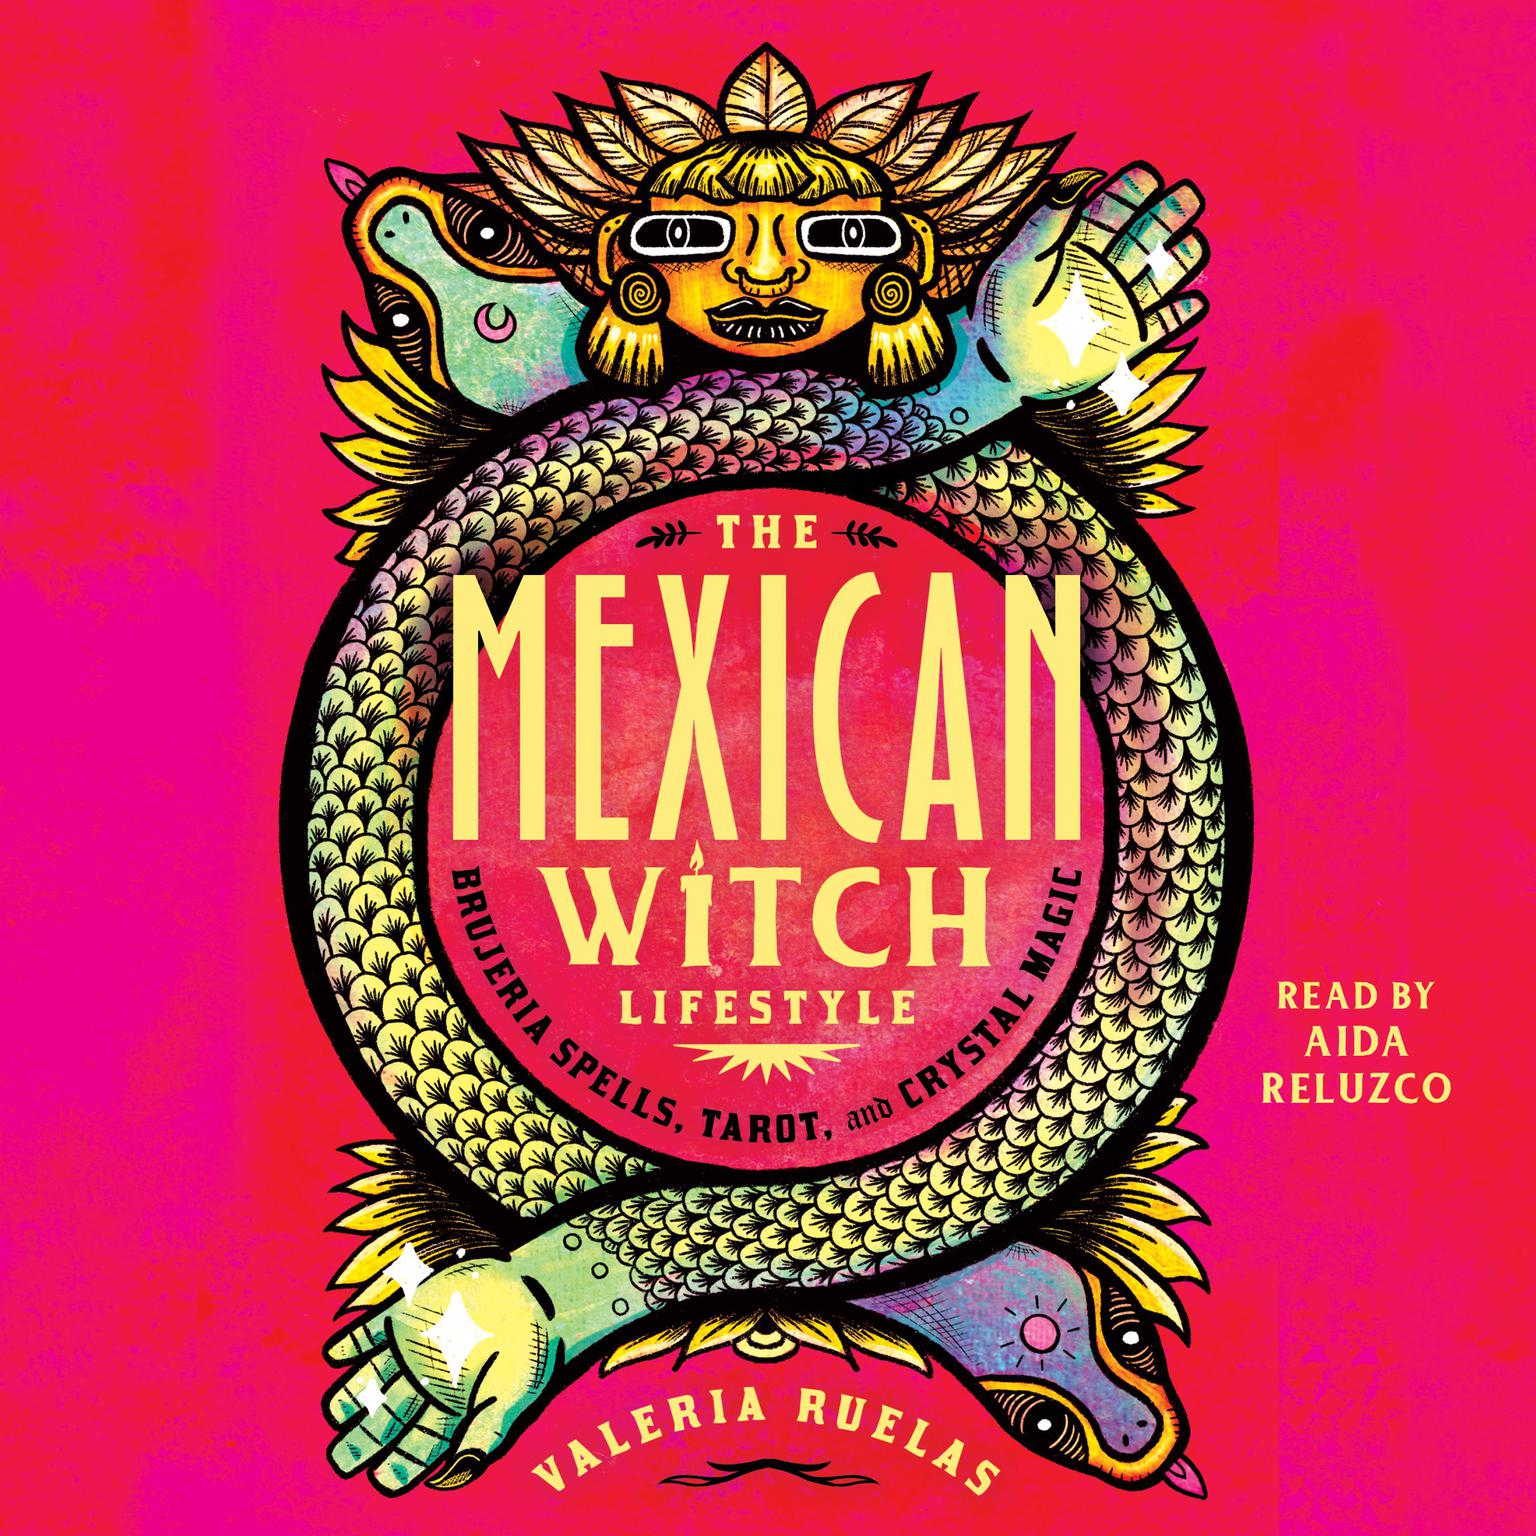 The Mexican Witch Lifestyle: Brujeria Spells, Tarot, and Crystal Magic Audiobook, by Valeria Ruelas